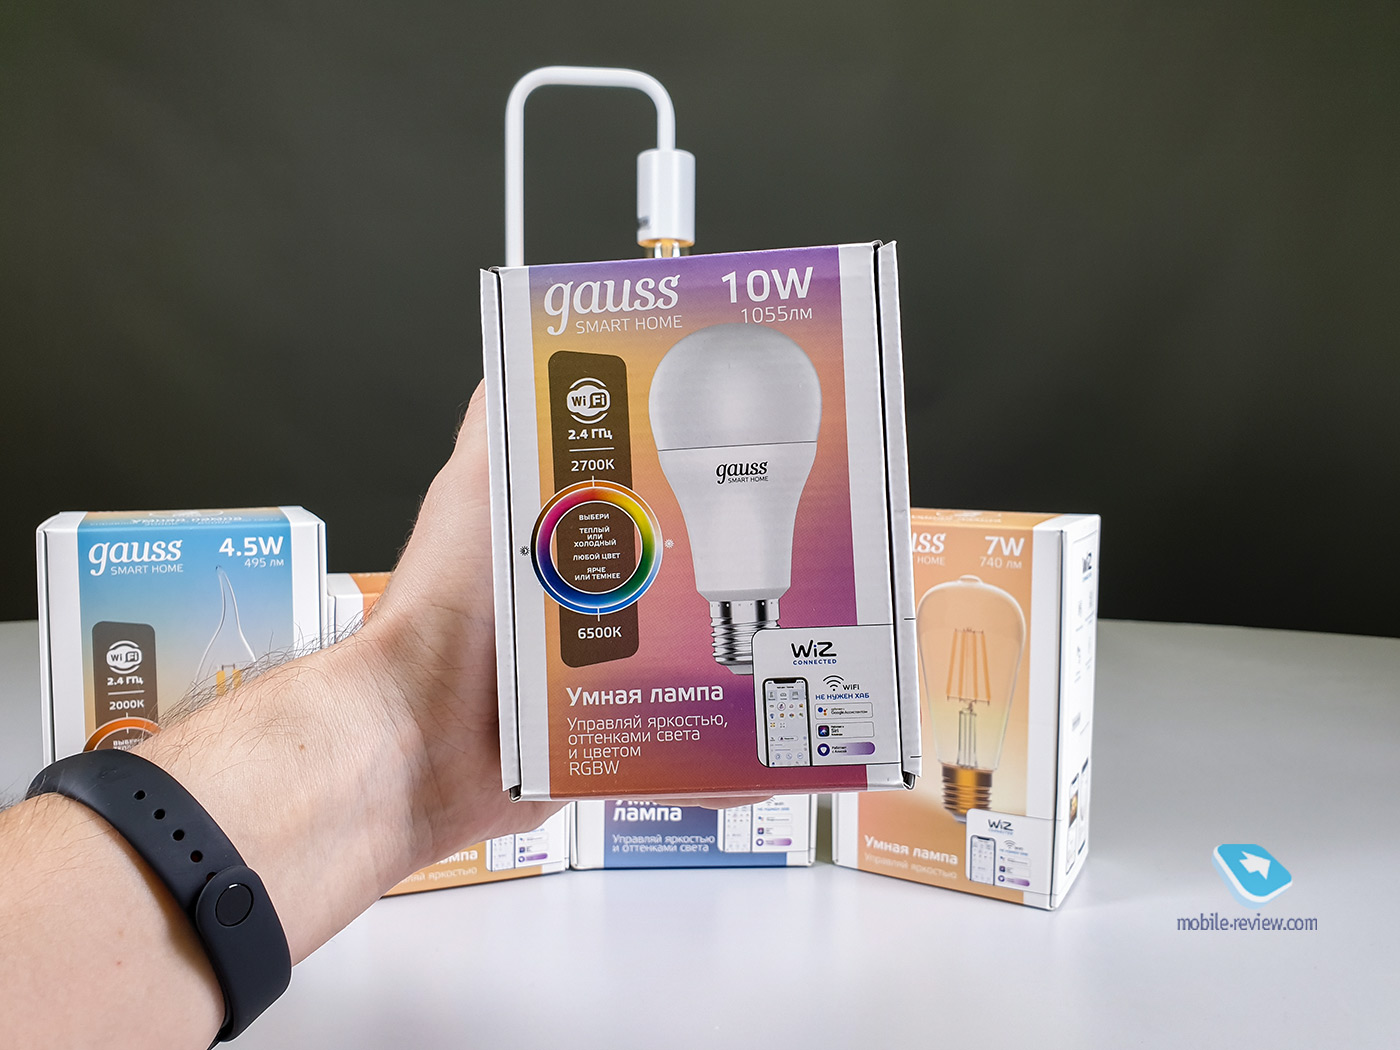 Gauss smart light: why is it important and how to create the right lighting in your home?